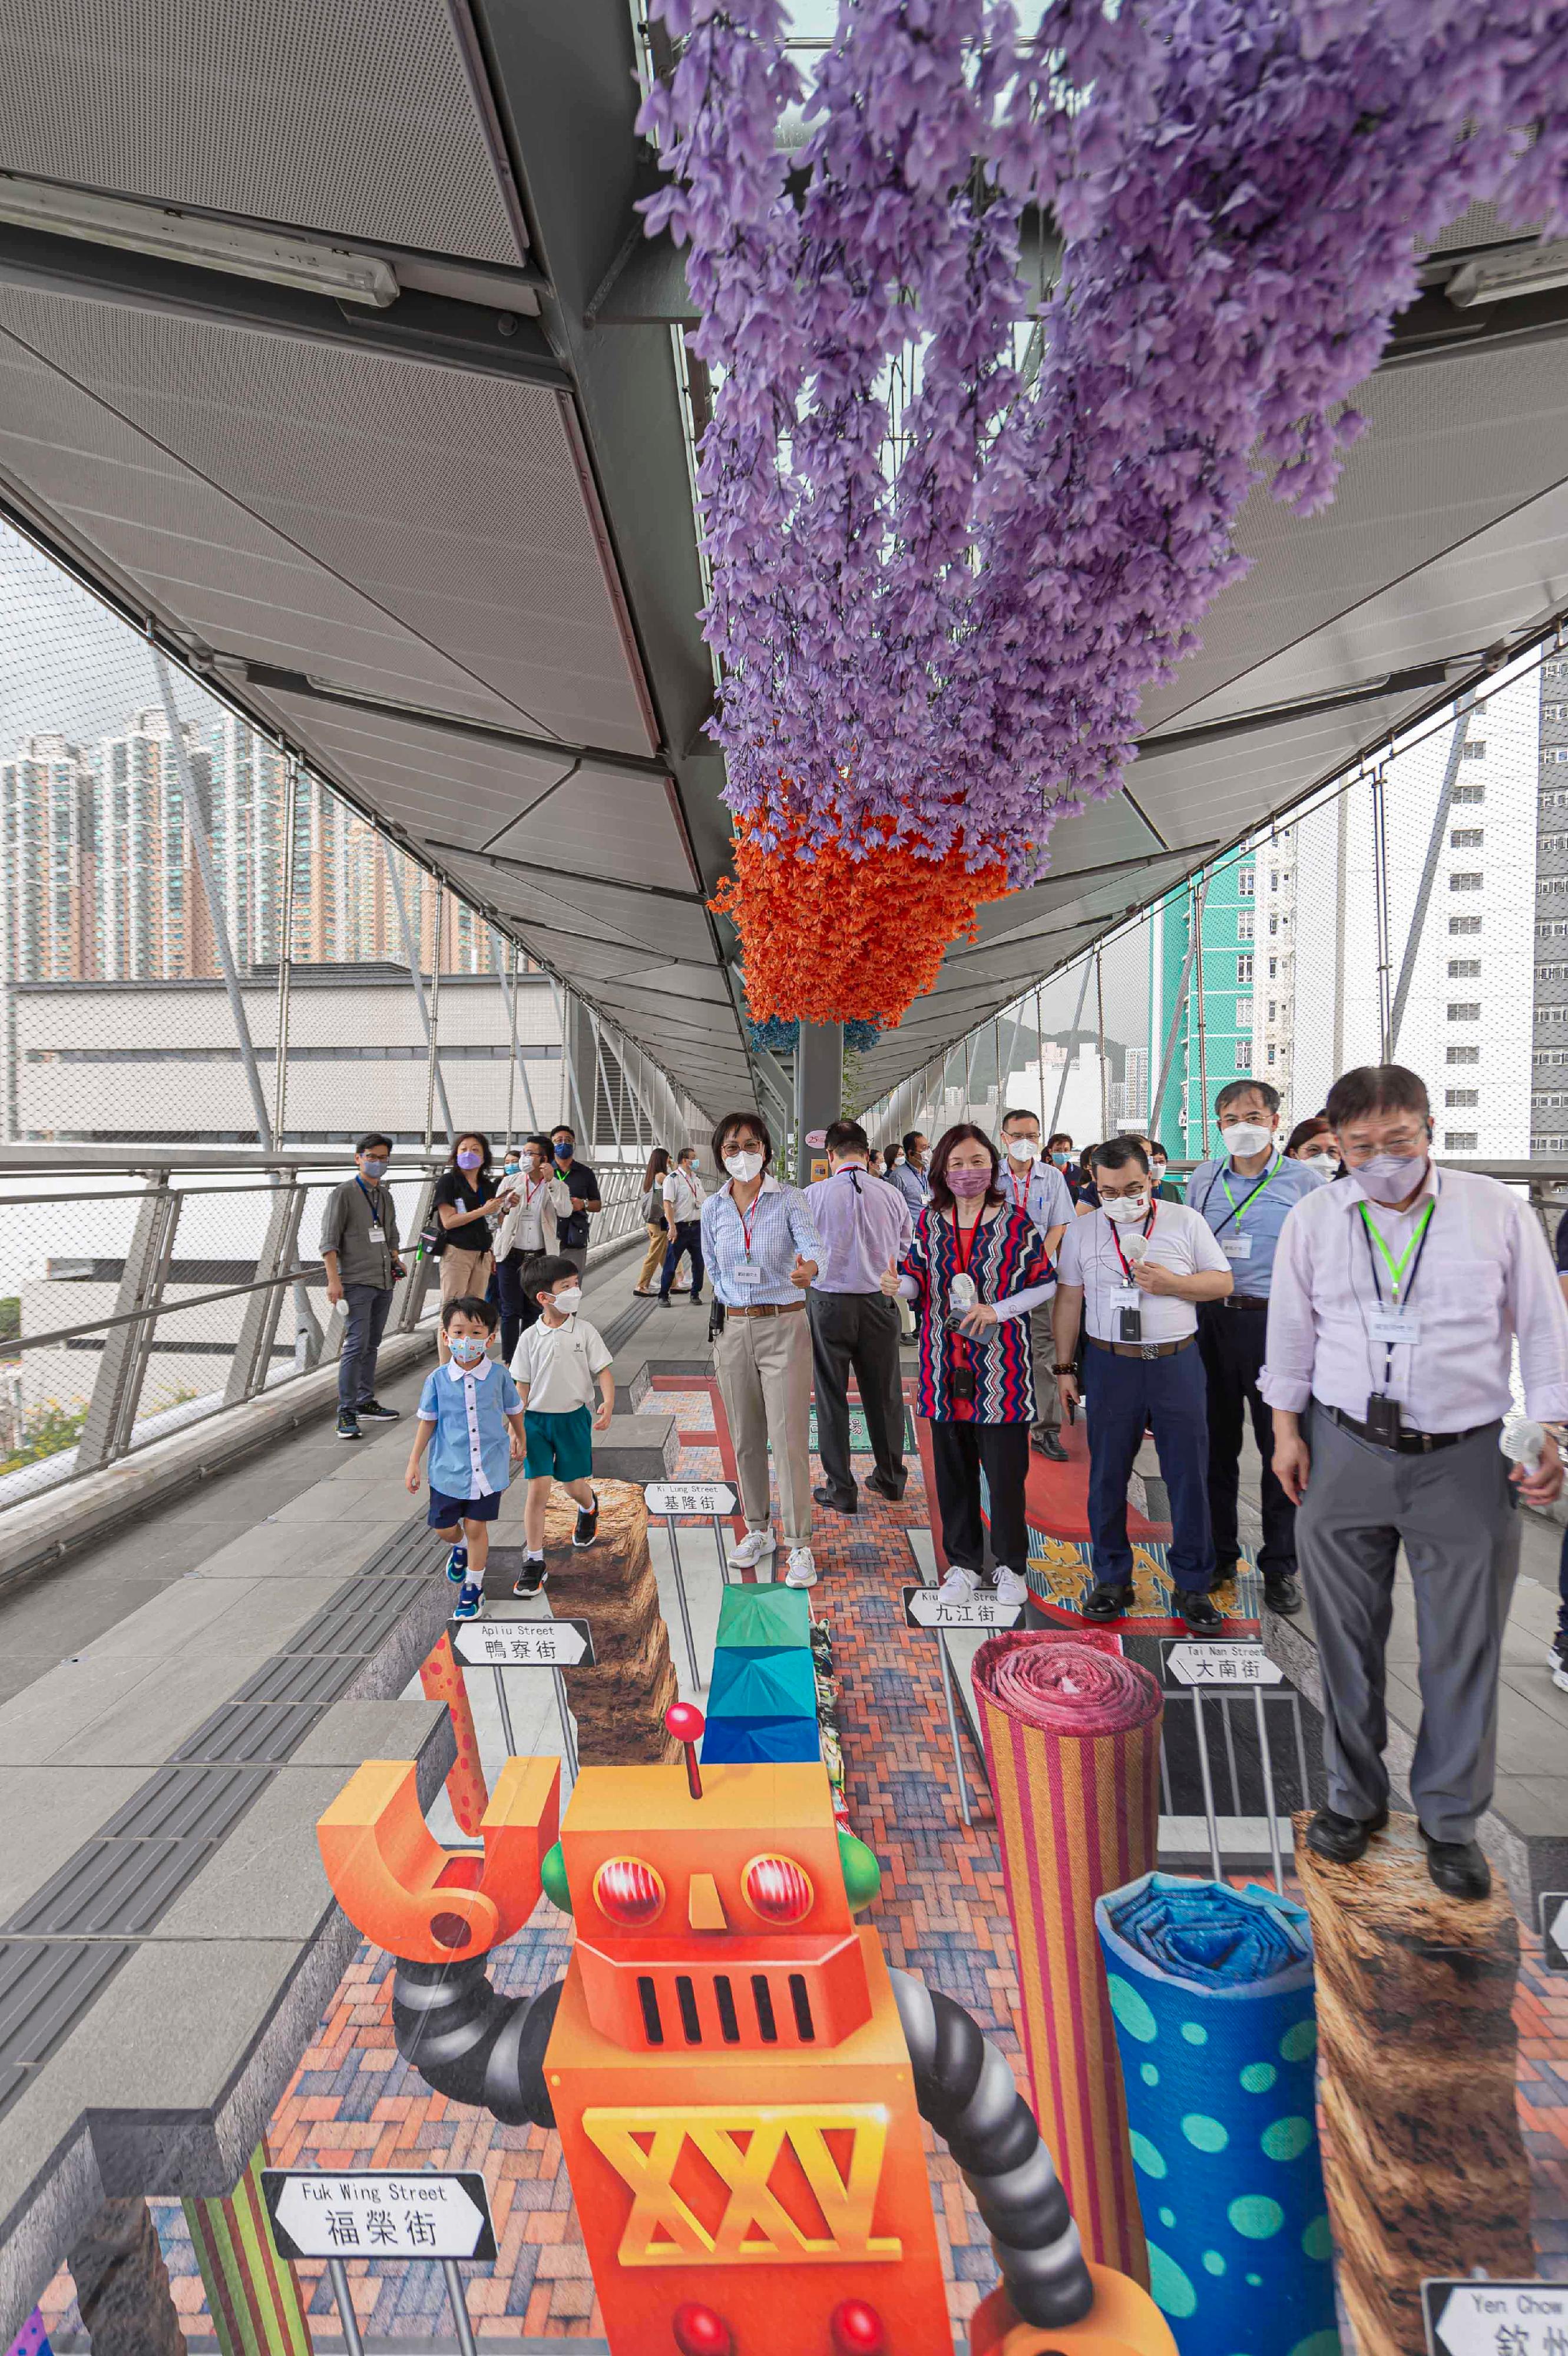 Members of the Hong Kong Housing Authority (HA) and its Commercial Properties Committee (CPC) today (August 2) visited the HA's non-domestic facilities. Photo shows the Chairman of the HA's CPC, Ms Serena Lau (front row, third left), and the members of HA/CPC viewing a 3D painting on the long span footbridge at Hoi Tat Estate in Sham Shui Po.